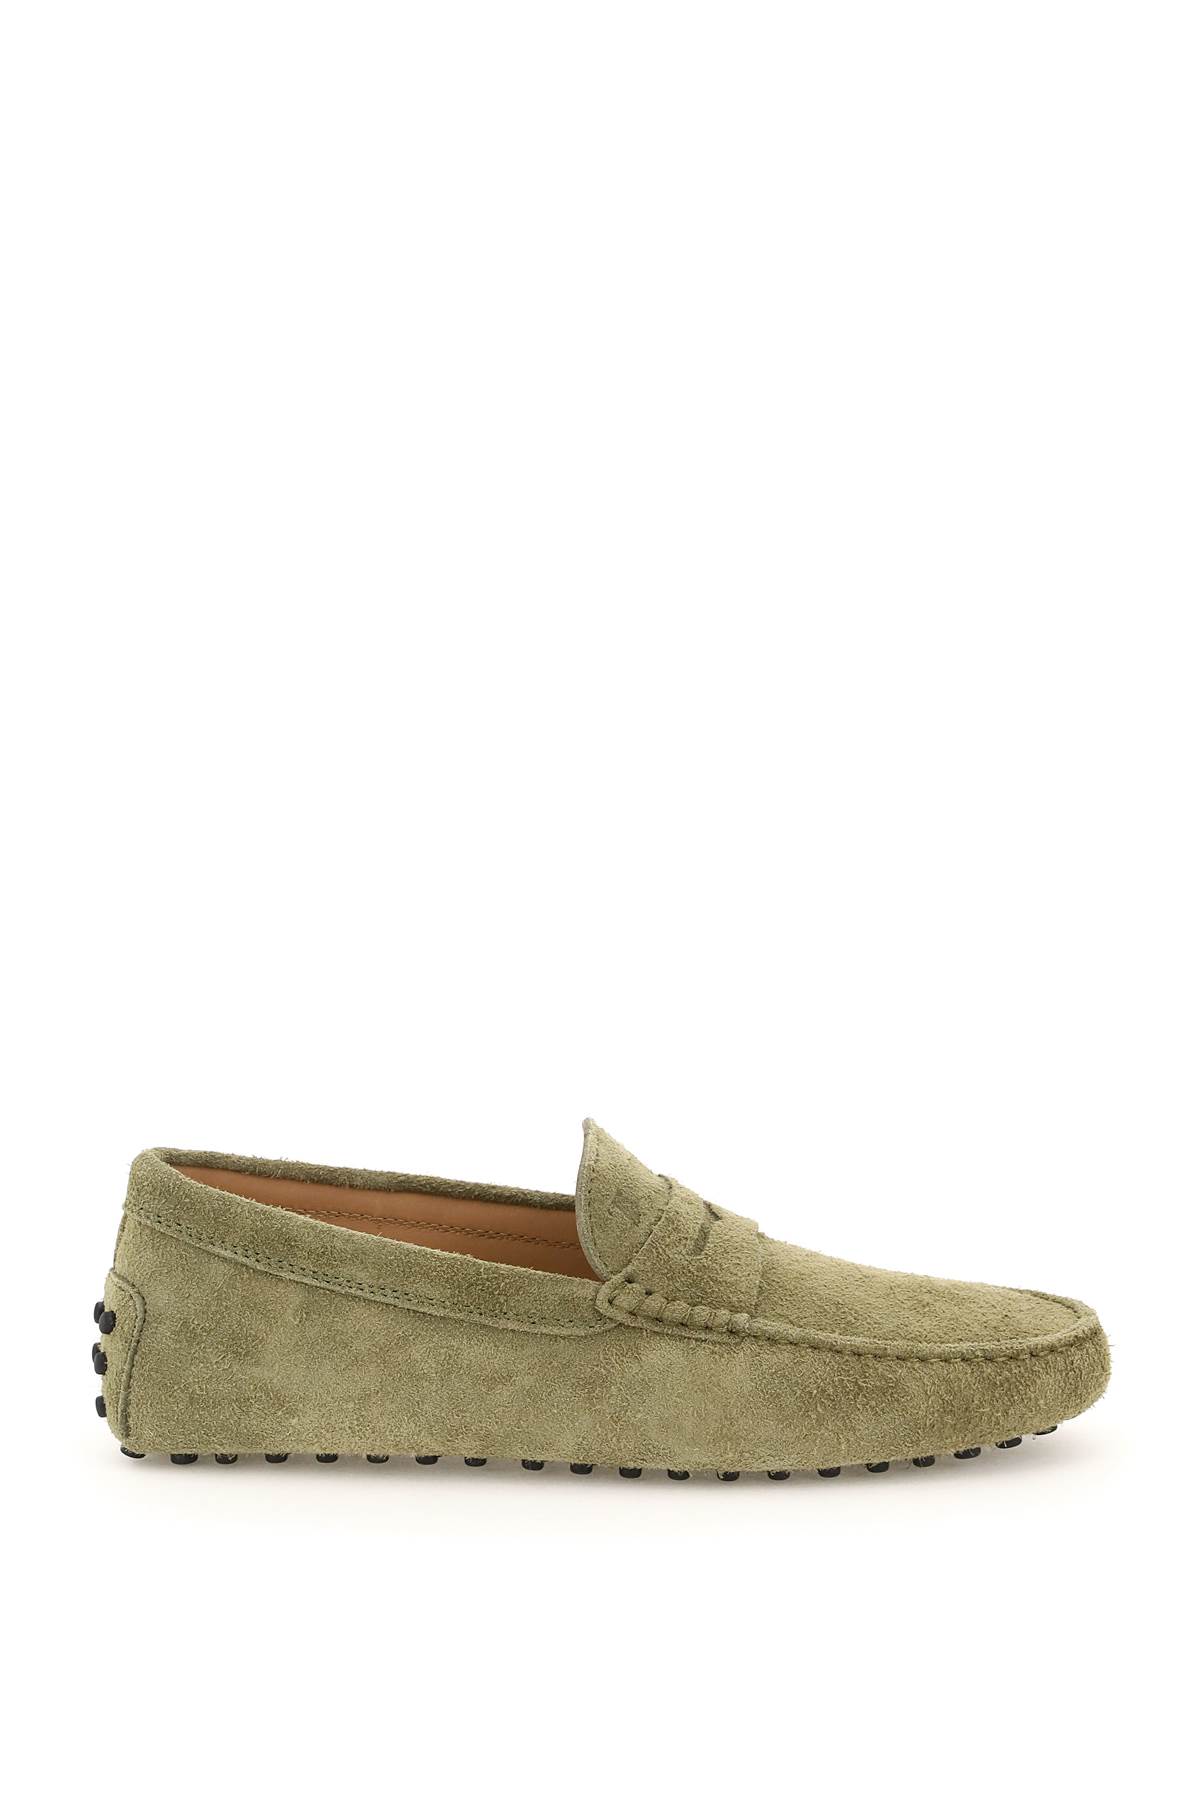 Tods Suede Leather Gommino Driver Loafers